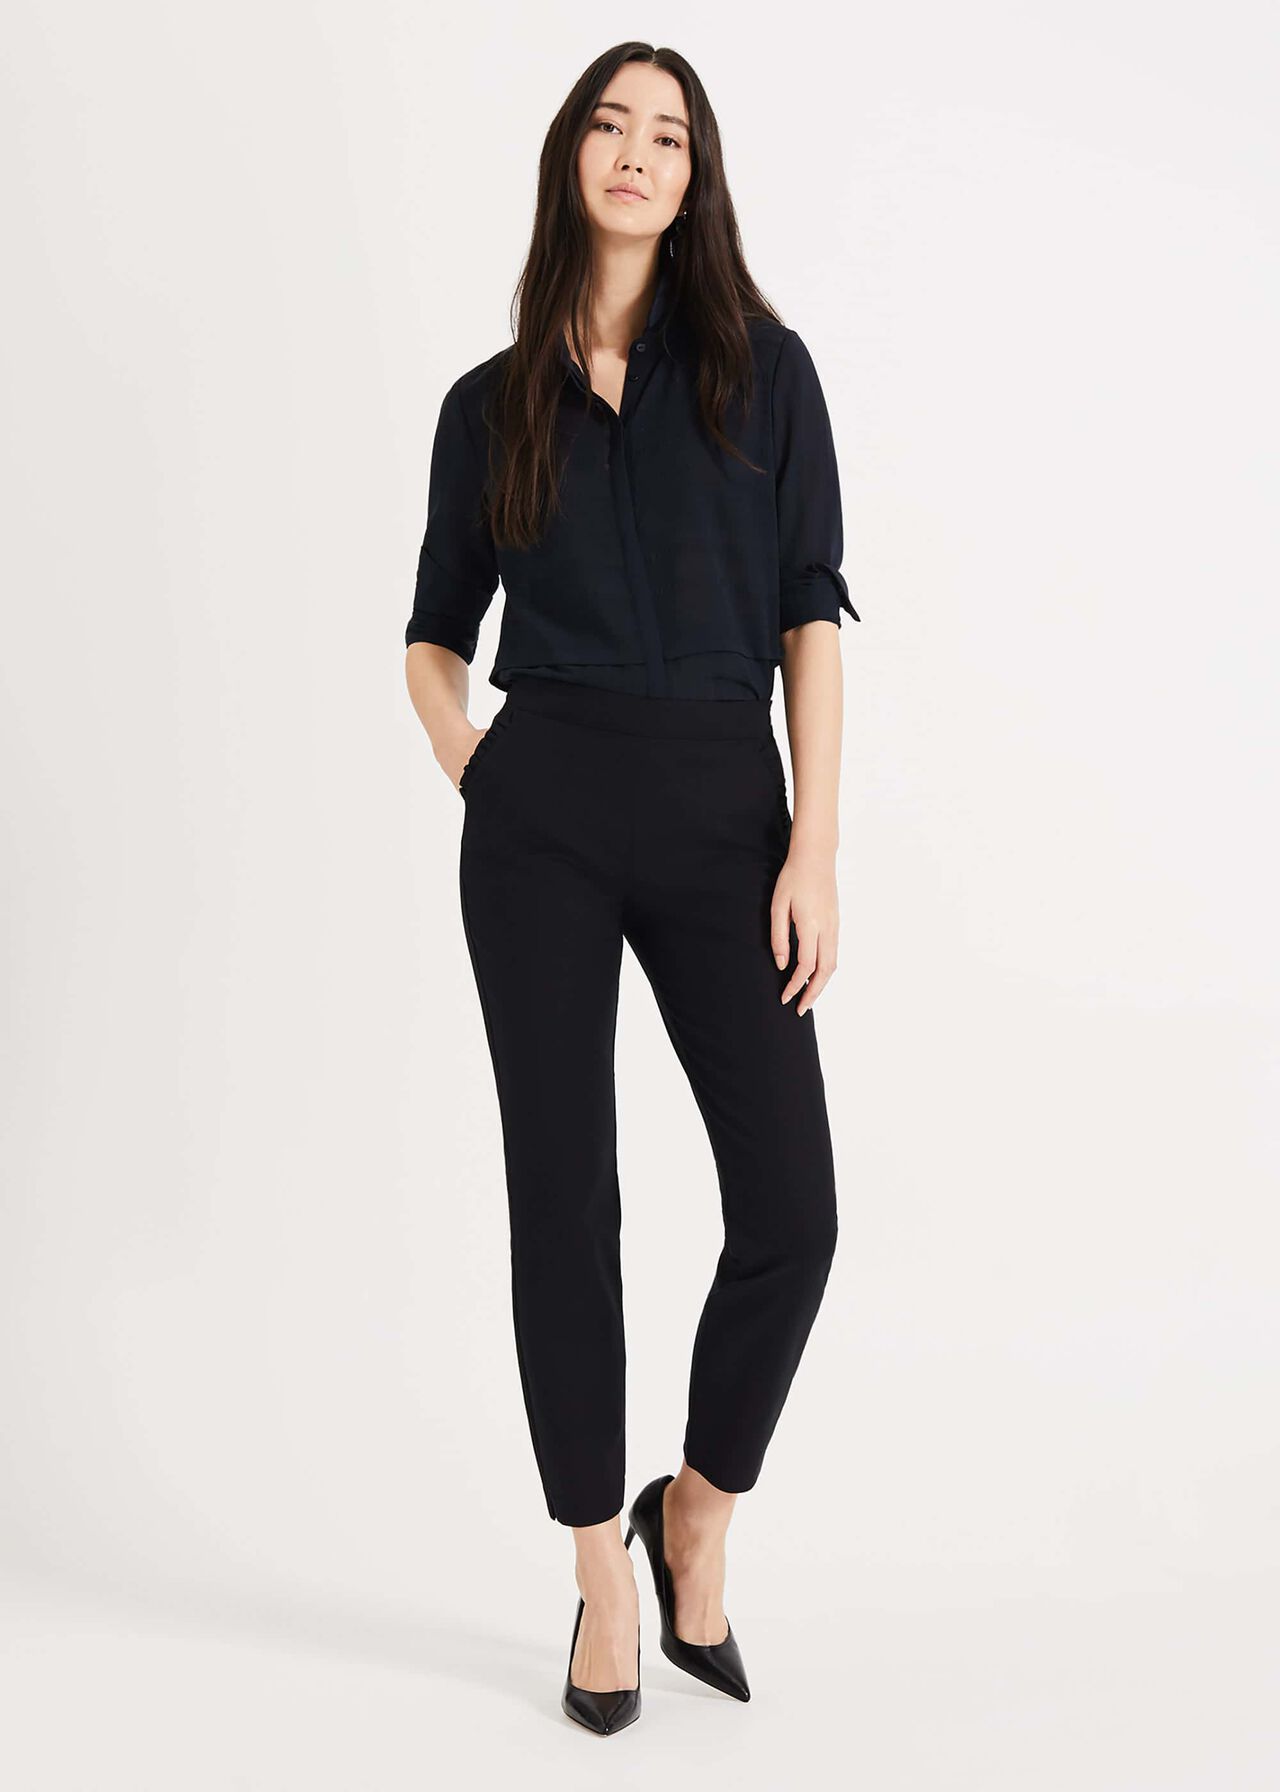 Marling Frill Pocket Trousers